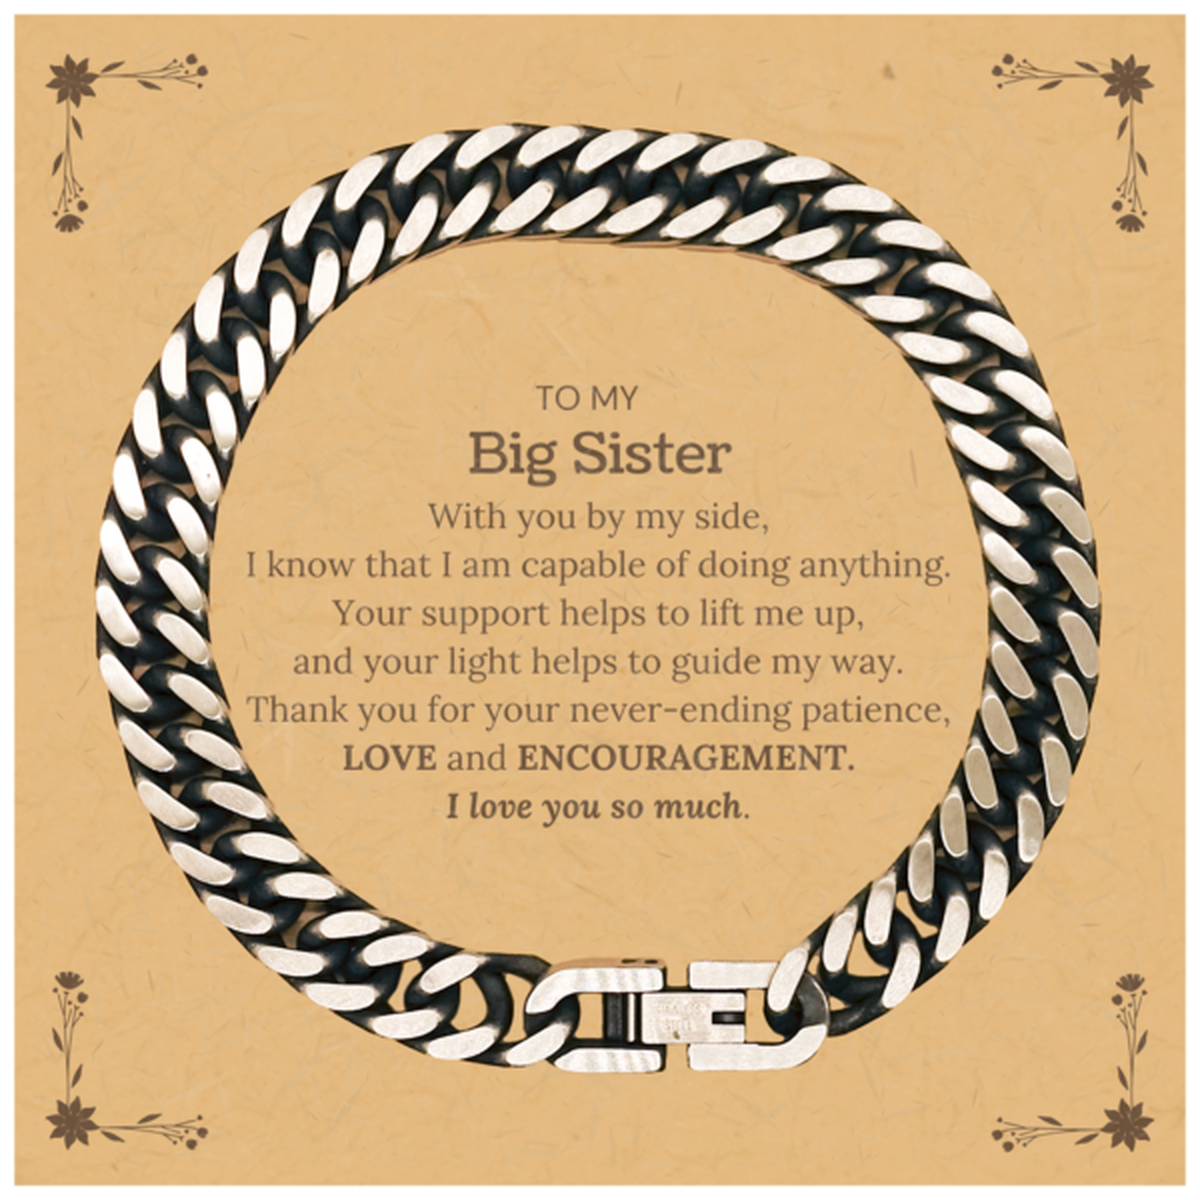 Appreciation Big Sister Cuban Link Chain Bracelet Gifts, To My Big Sister Birthday Christmas Wedding Keepsake Gifts for Big Sister With you by my side, I know that I am capable of doing anything. I love you so much